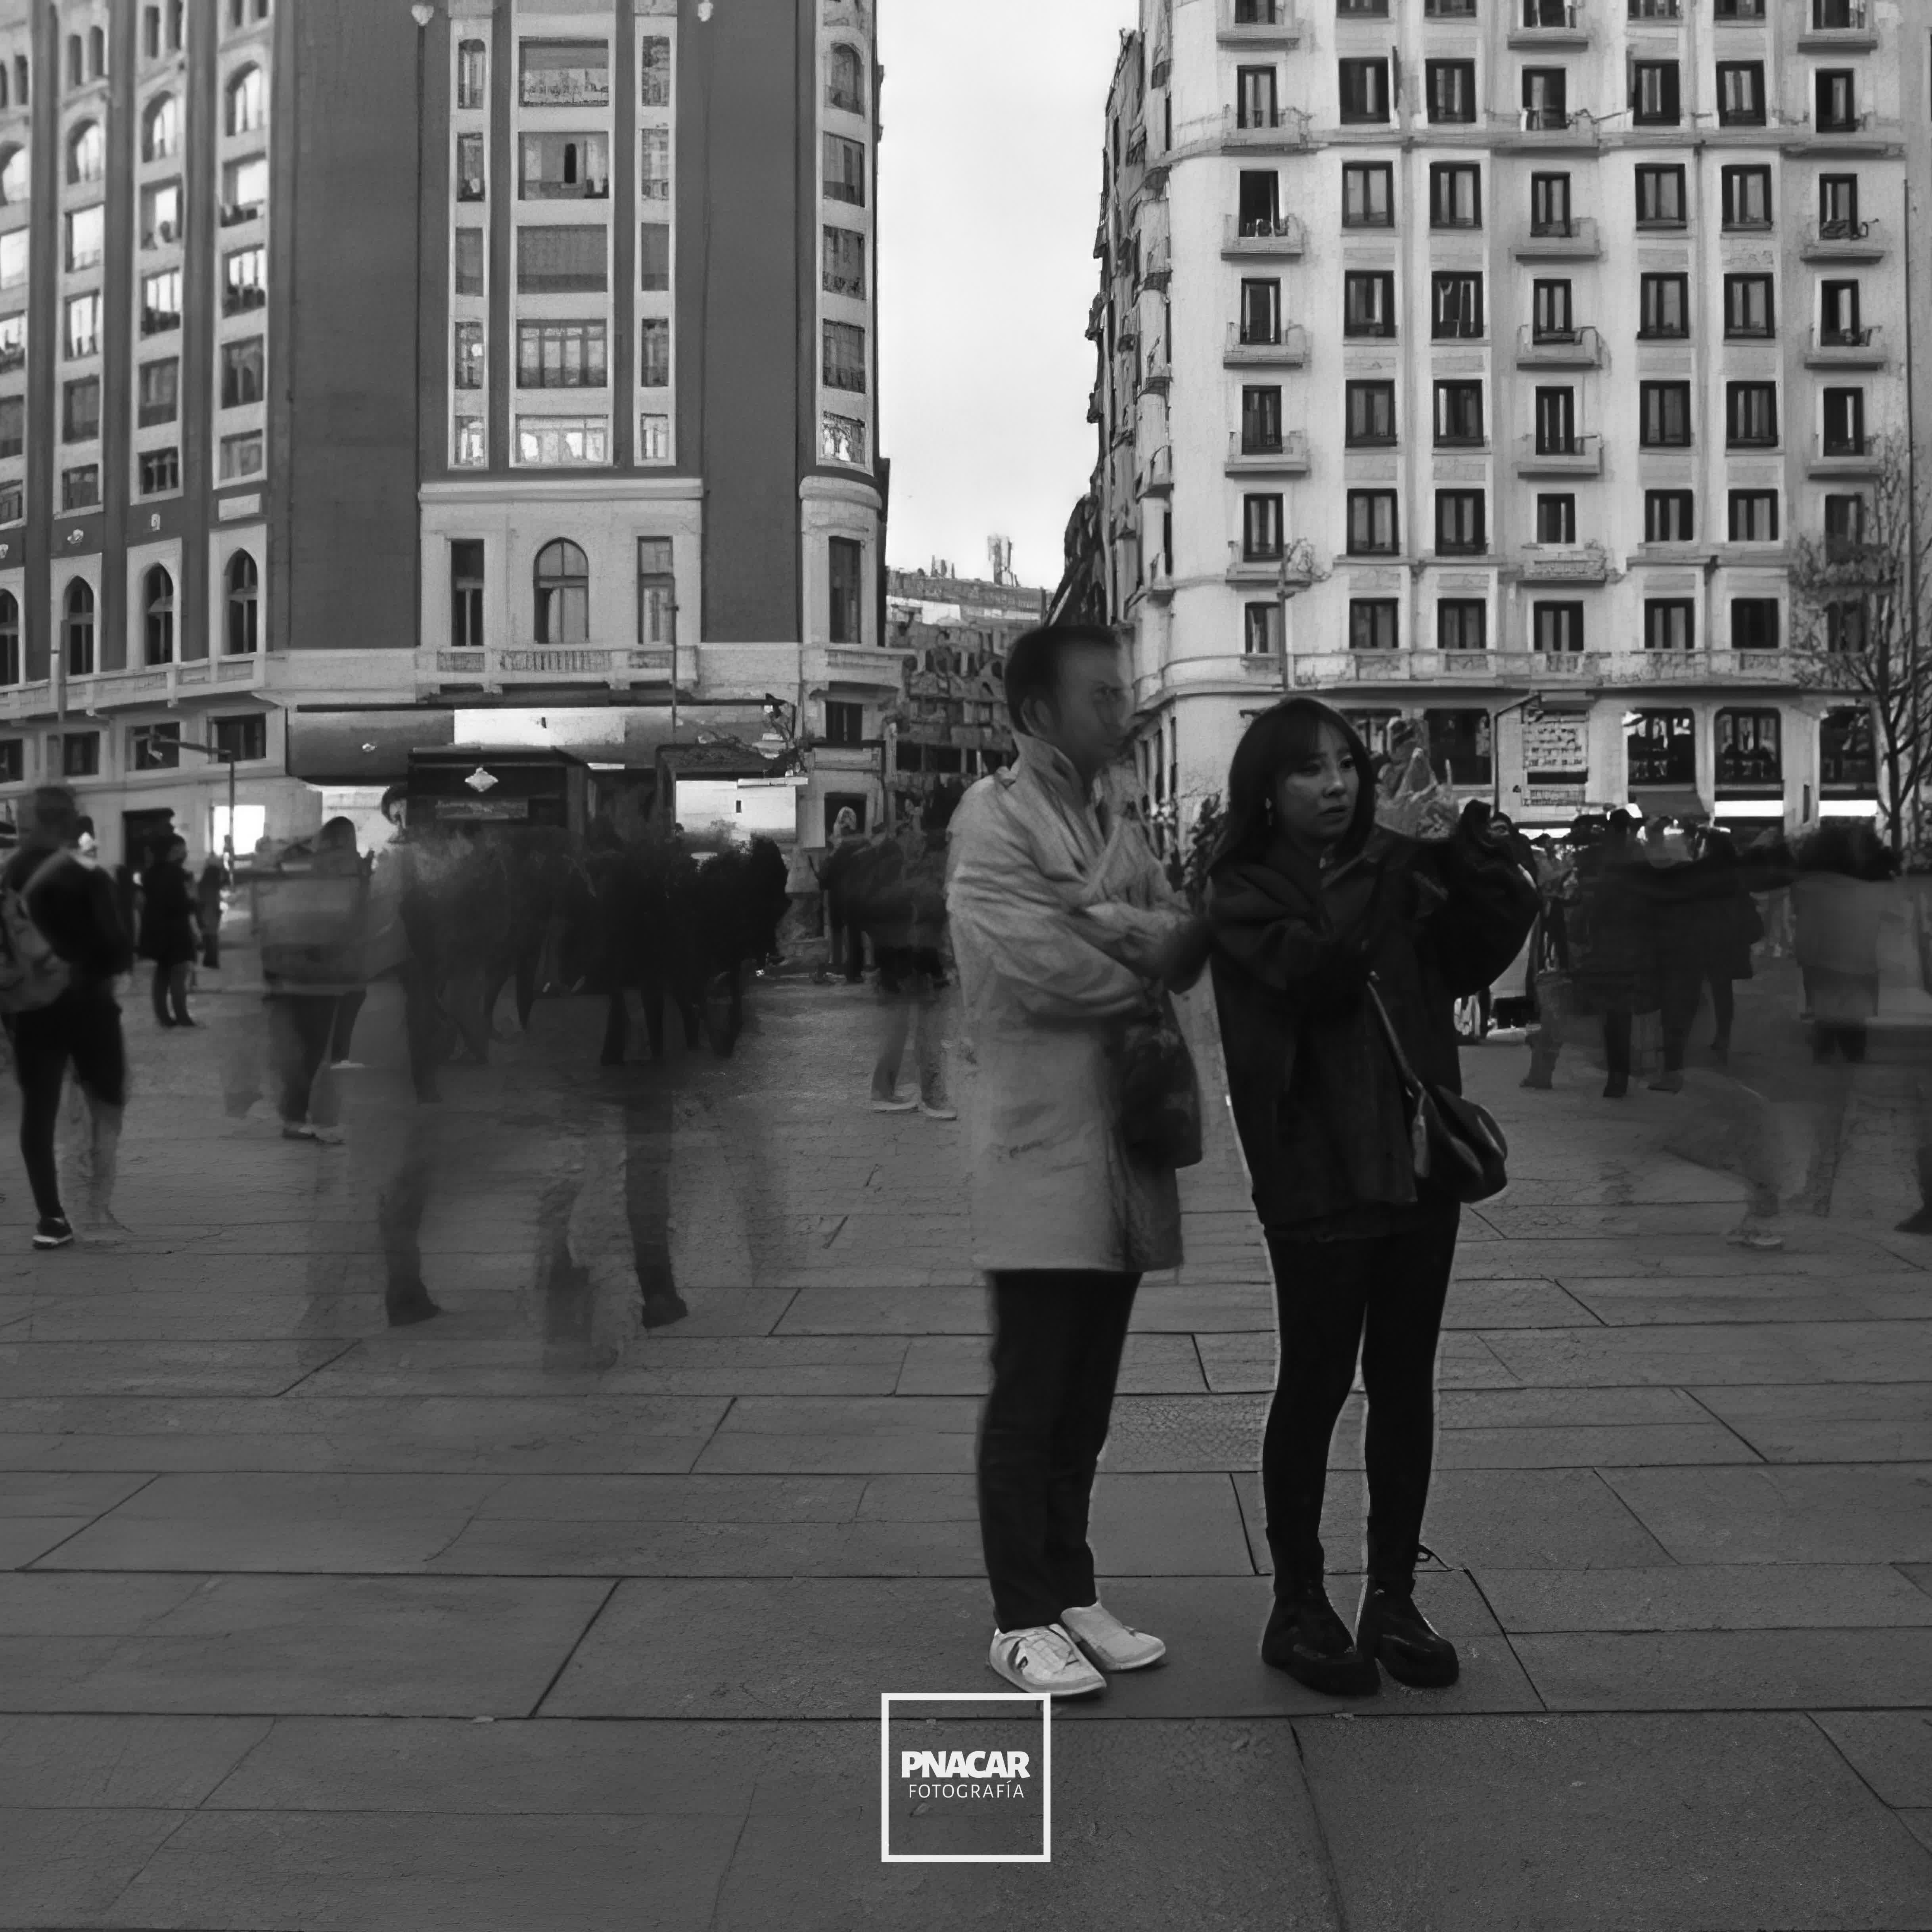 Callao Square on a daily moment, on a 35 mm camera